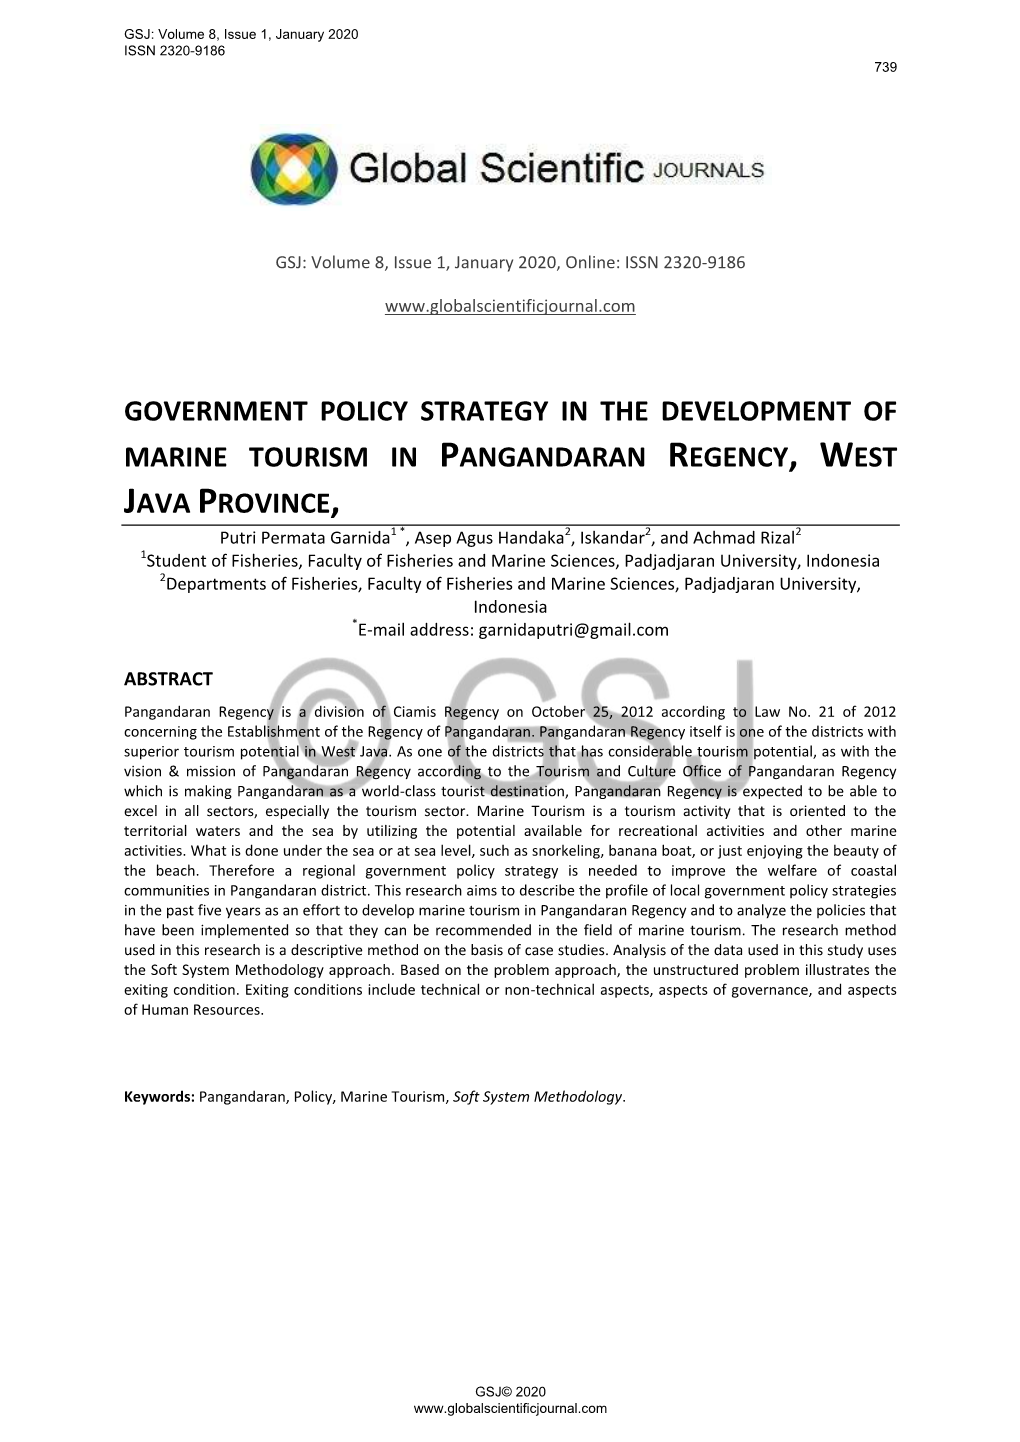 Government Policy Strategy in the Development of Marine Tourism in Pangandaran Regency, West Java Province